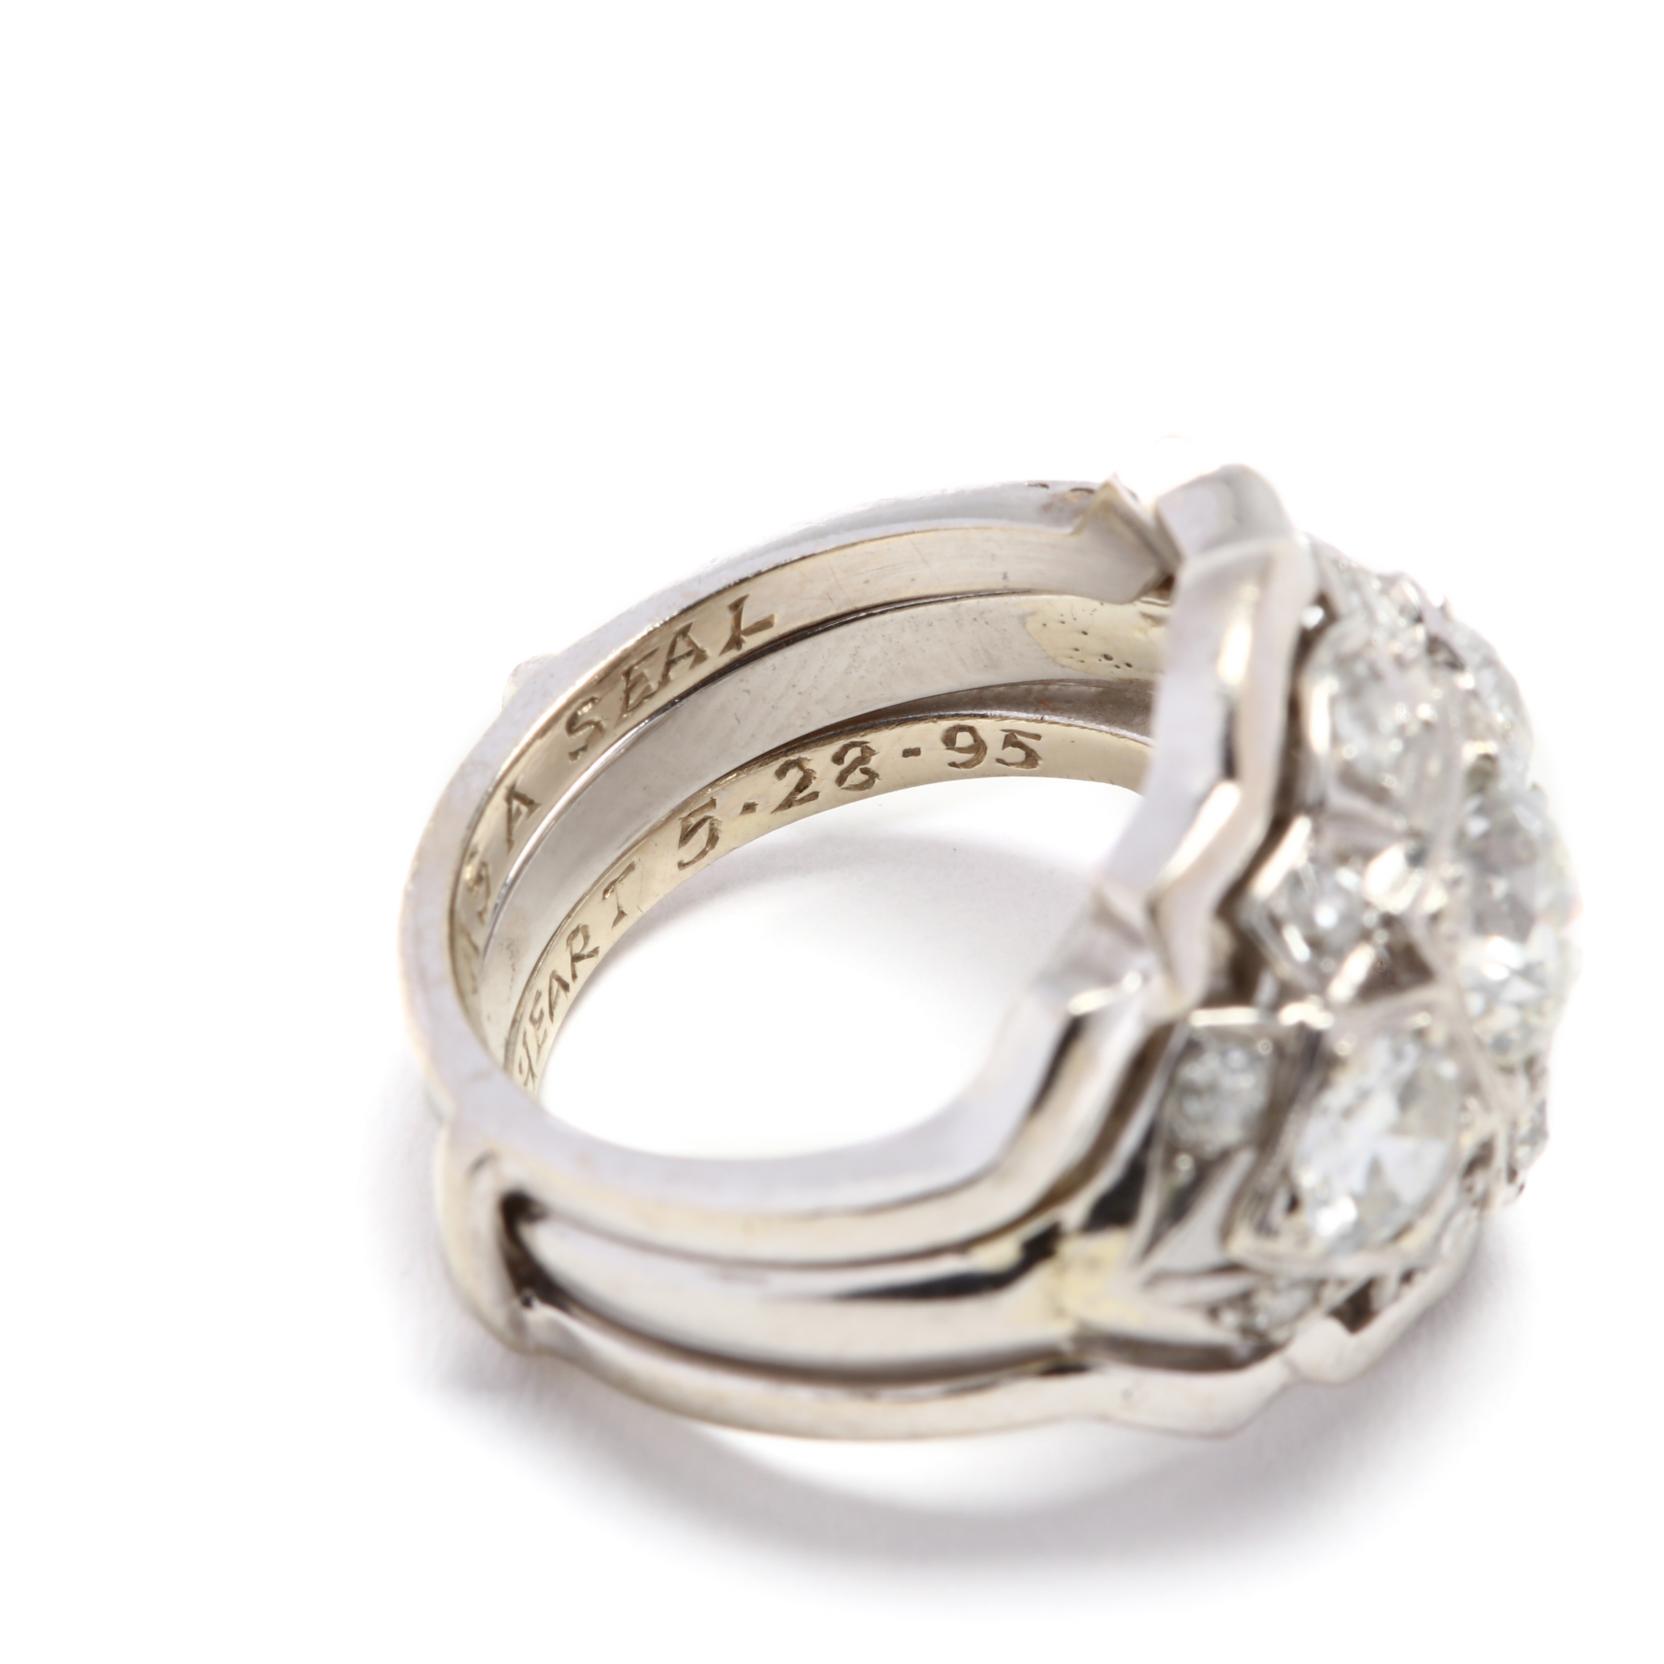 Vintage Platinum and Diamond Ring with 14KT White Gold Jacket - Image 8 of 9